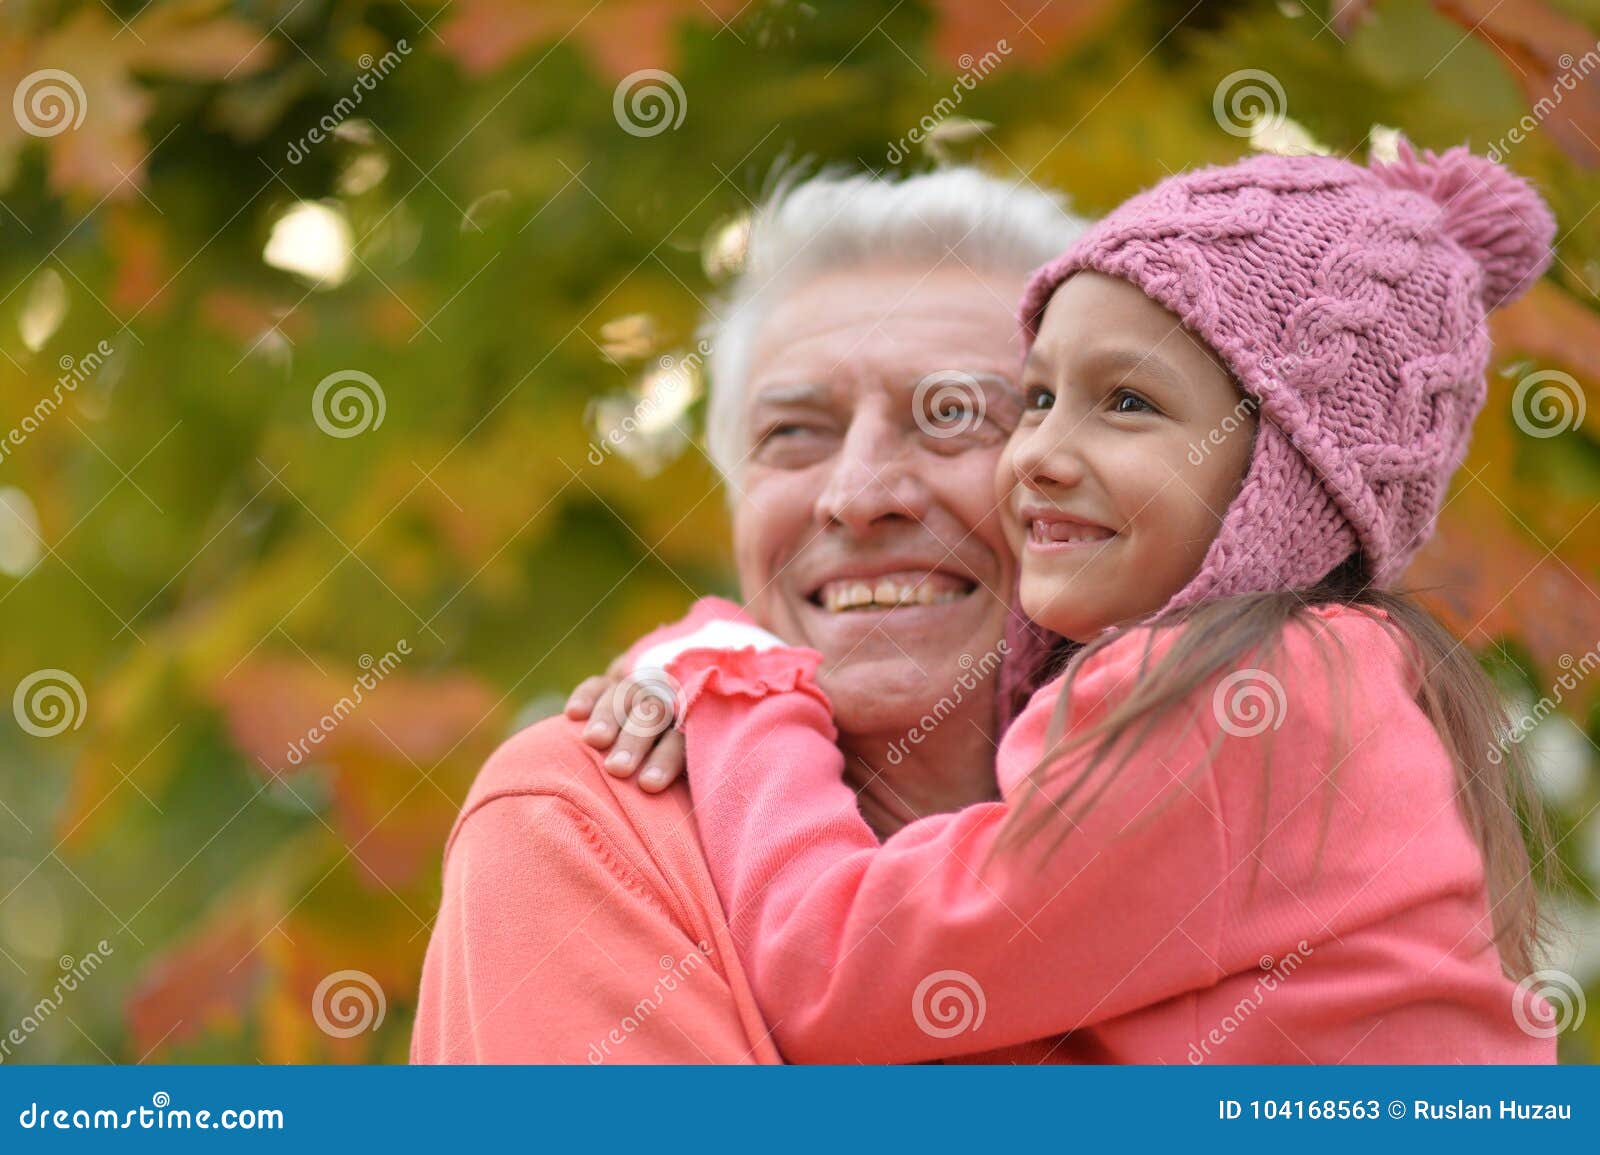 Grandfather And Granddaughter In Park Stock Image Image Of Park Mature 104168563